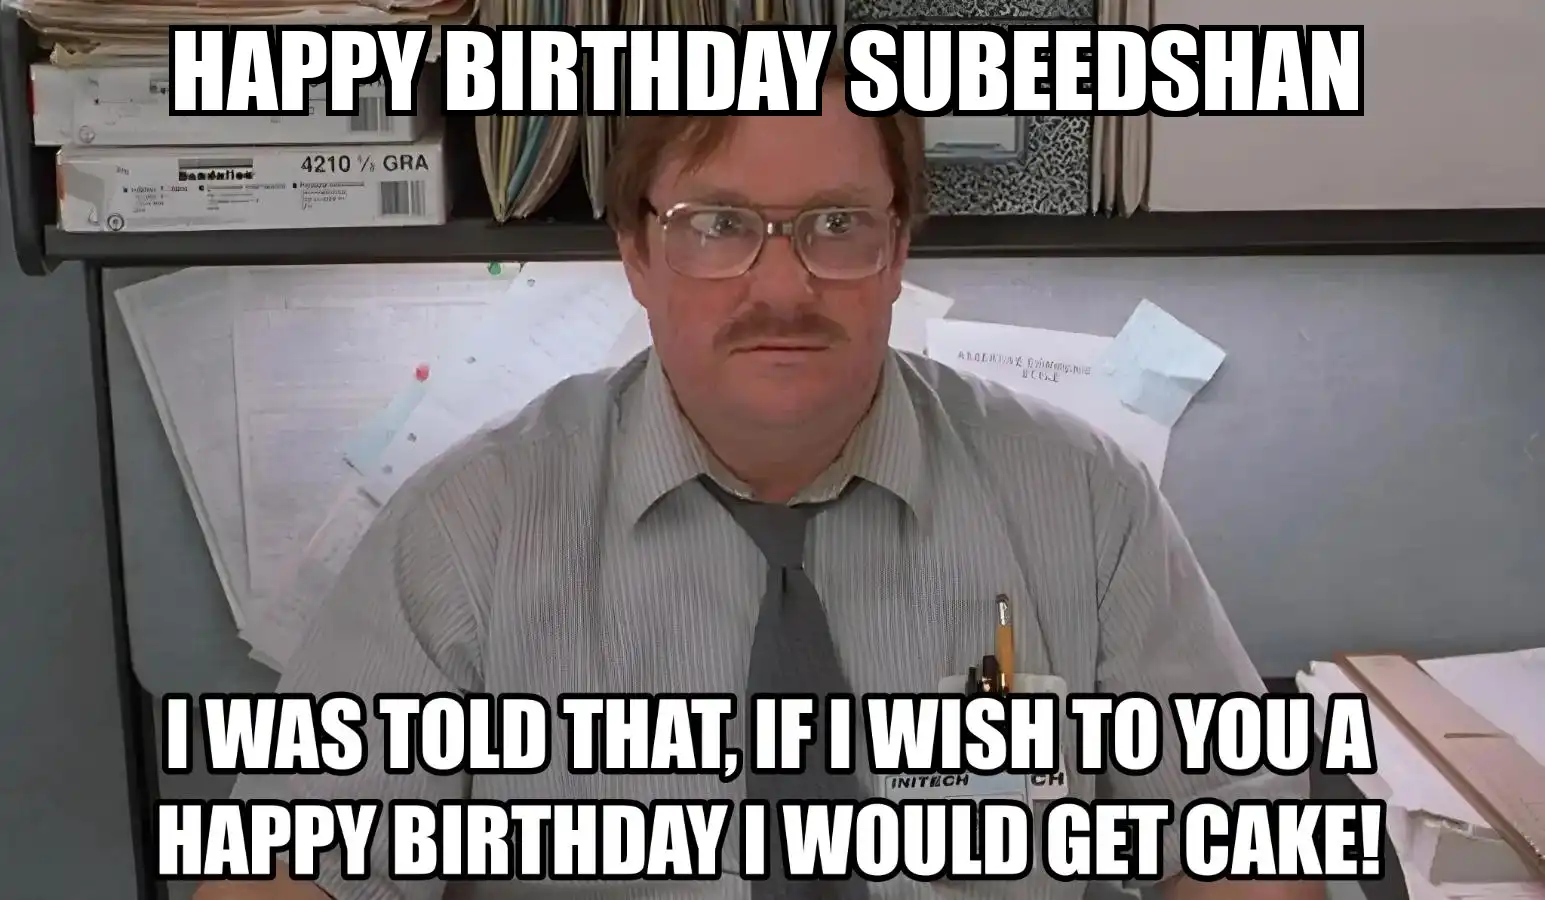 Happy Birthday Subeedshan I Would Get A Cake Meme